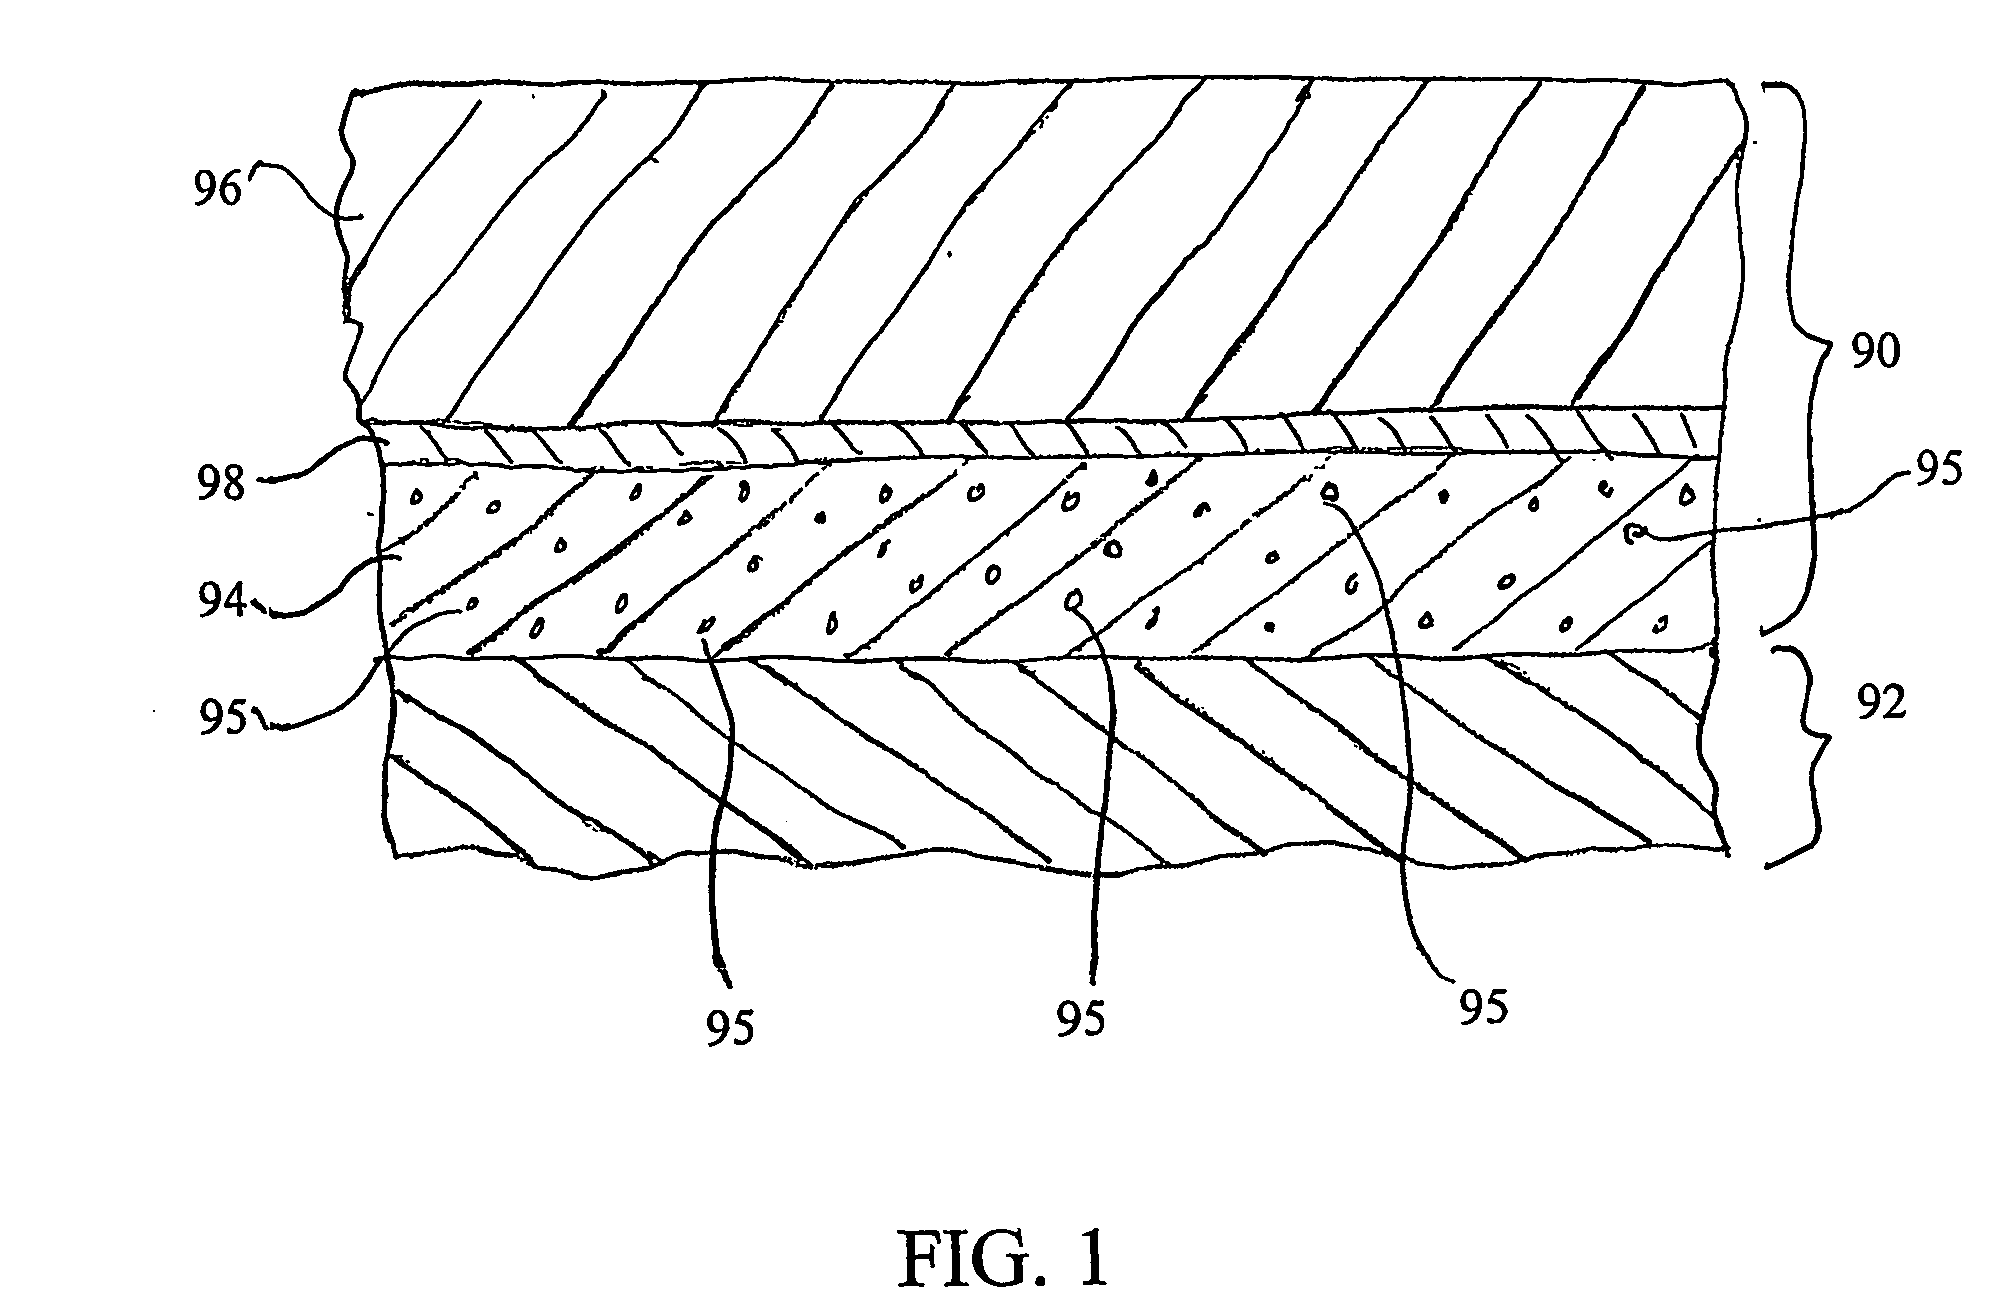 Method and apparatus for dispersion strengthened bond coats for thermal barrier coatings